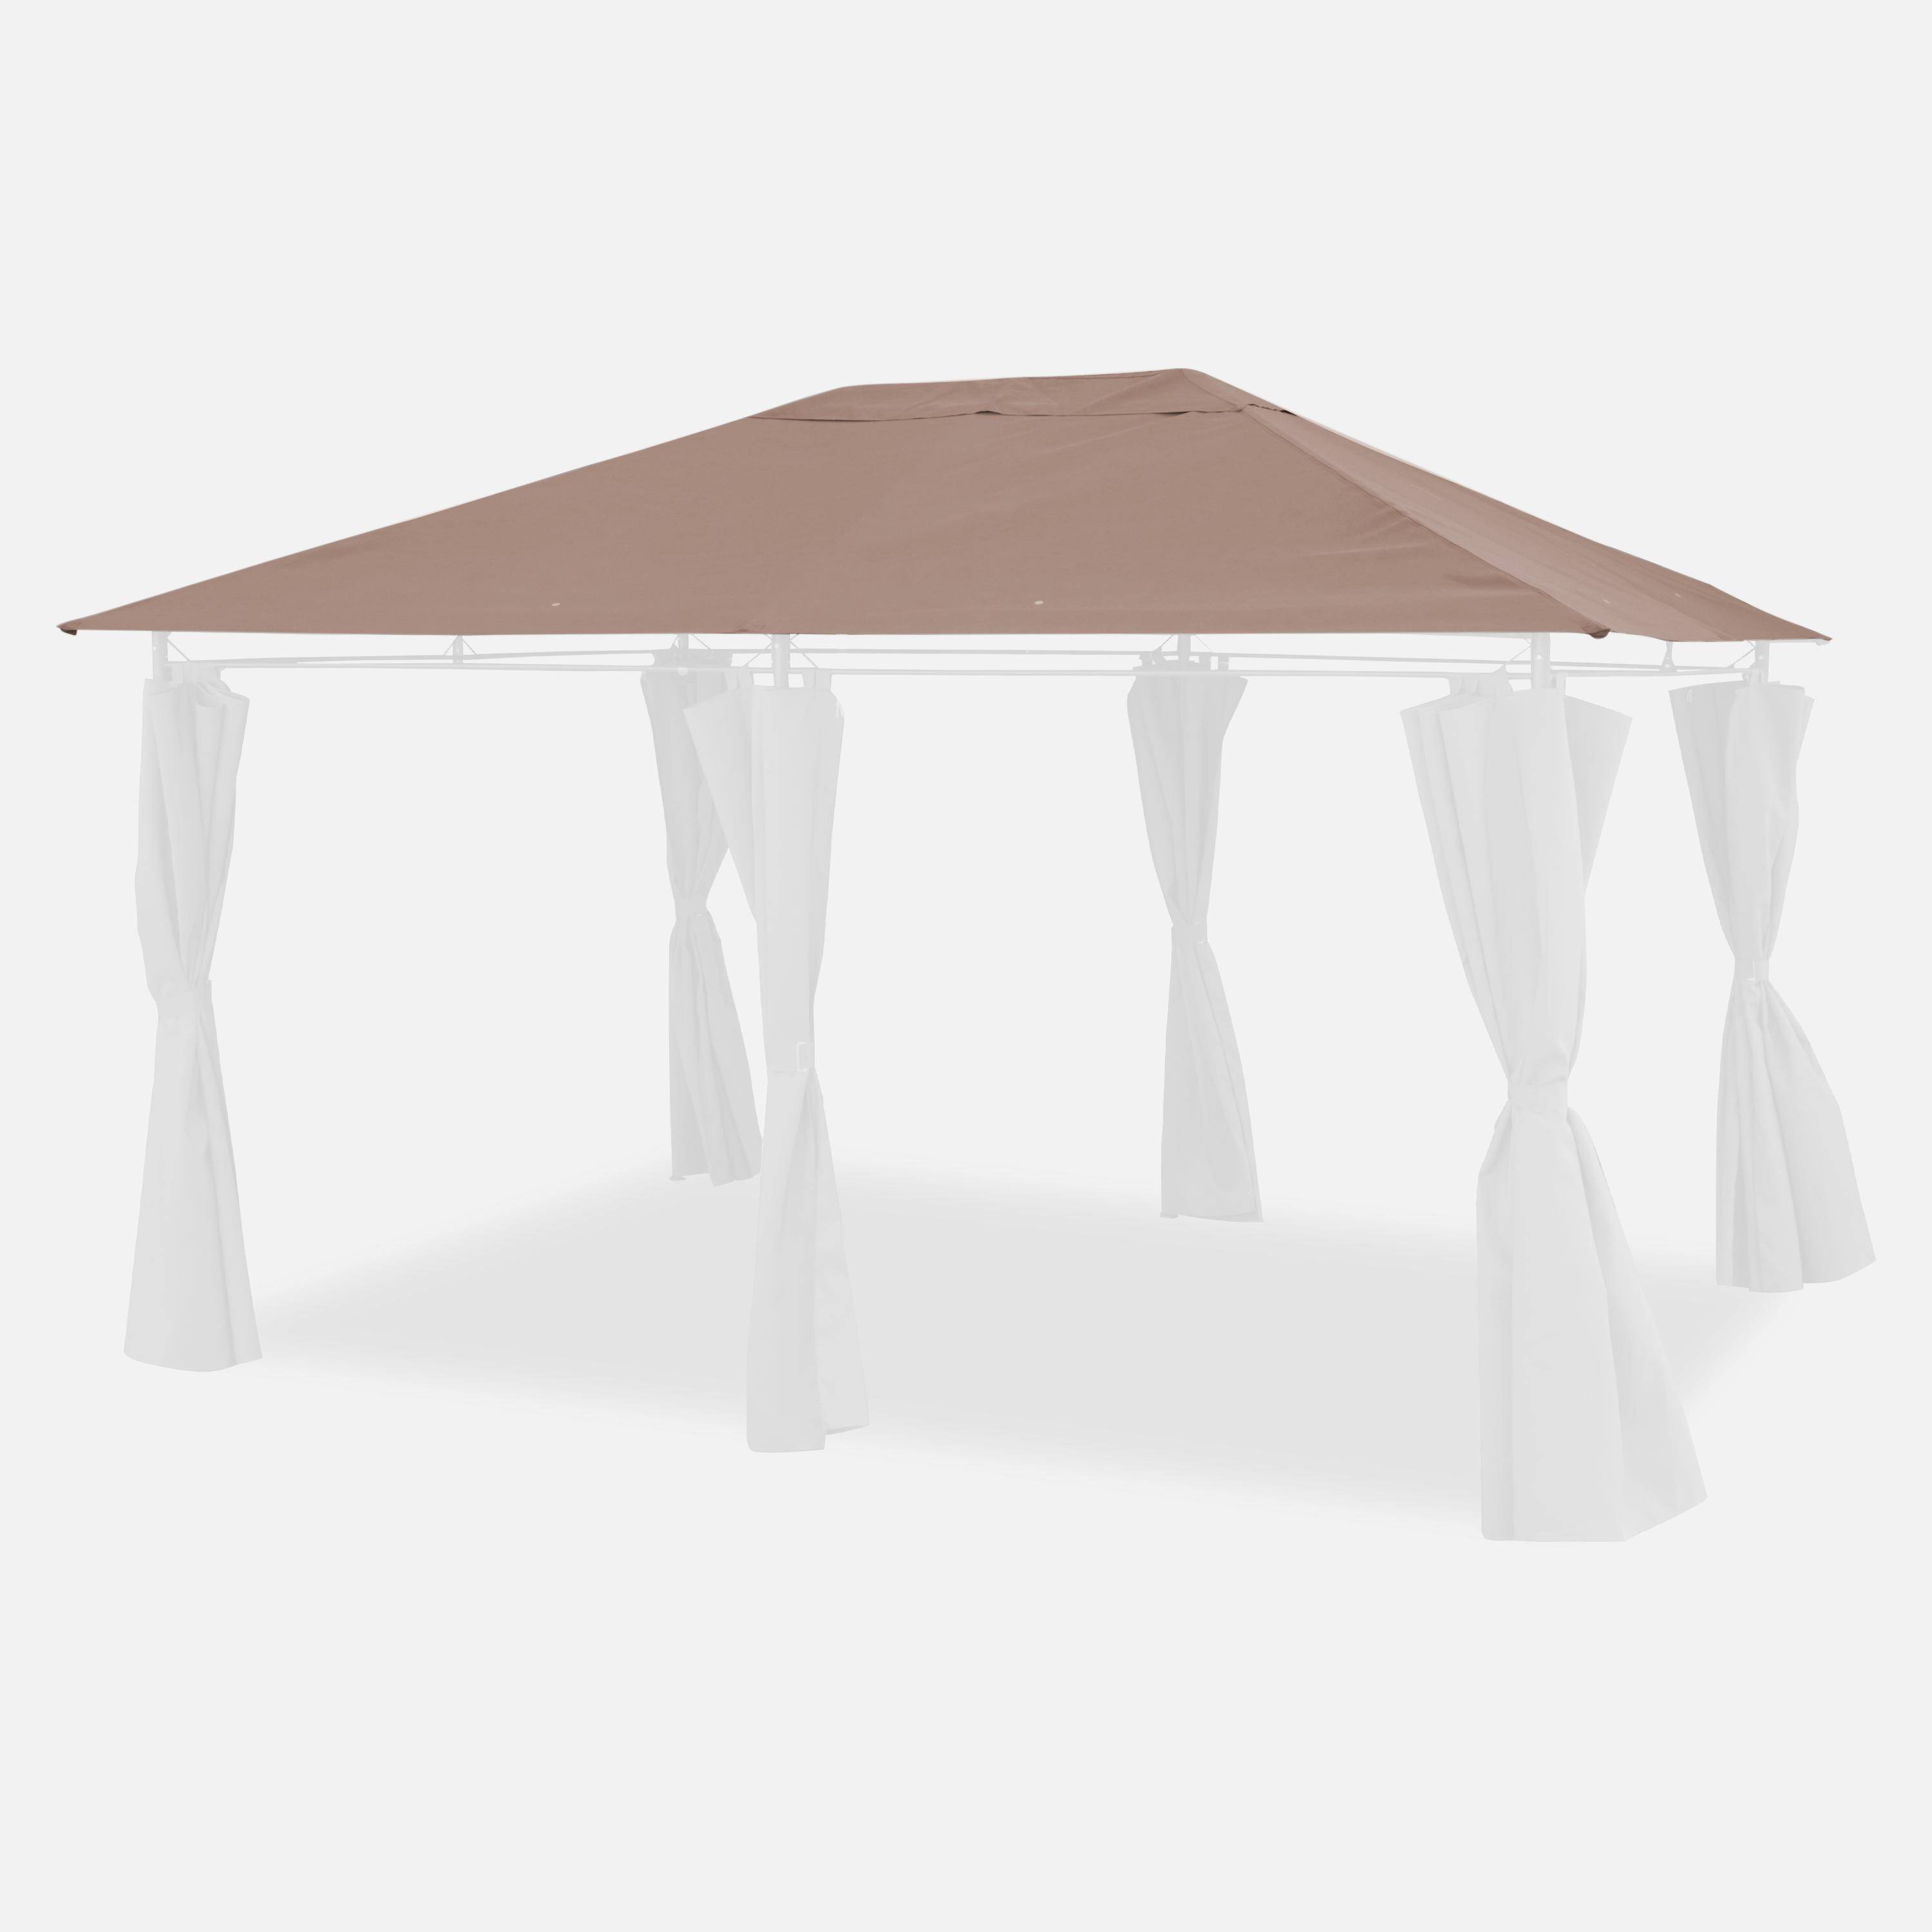 Taupe roof cover for Divio 3x4m arbour - pergola cover, replacement cover,sweeek,Photo1